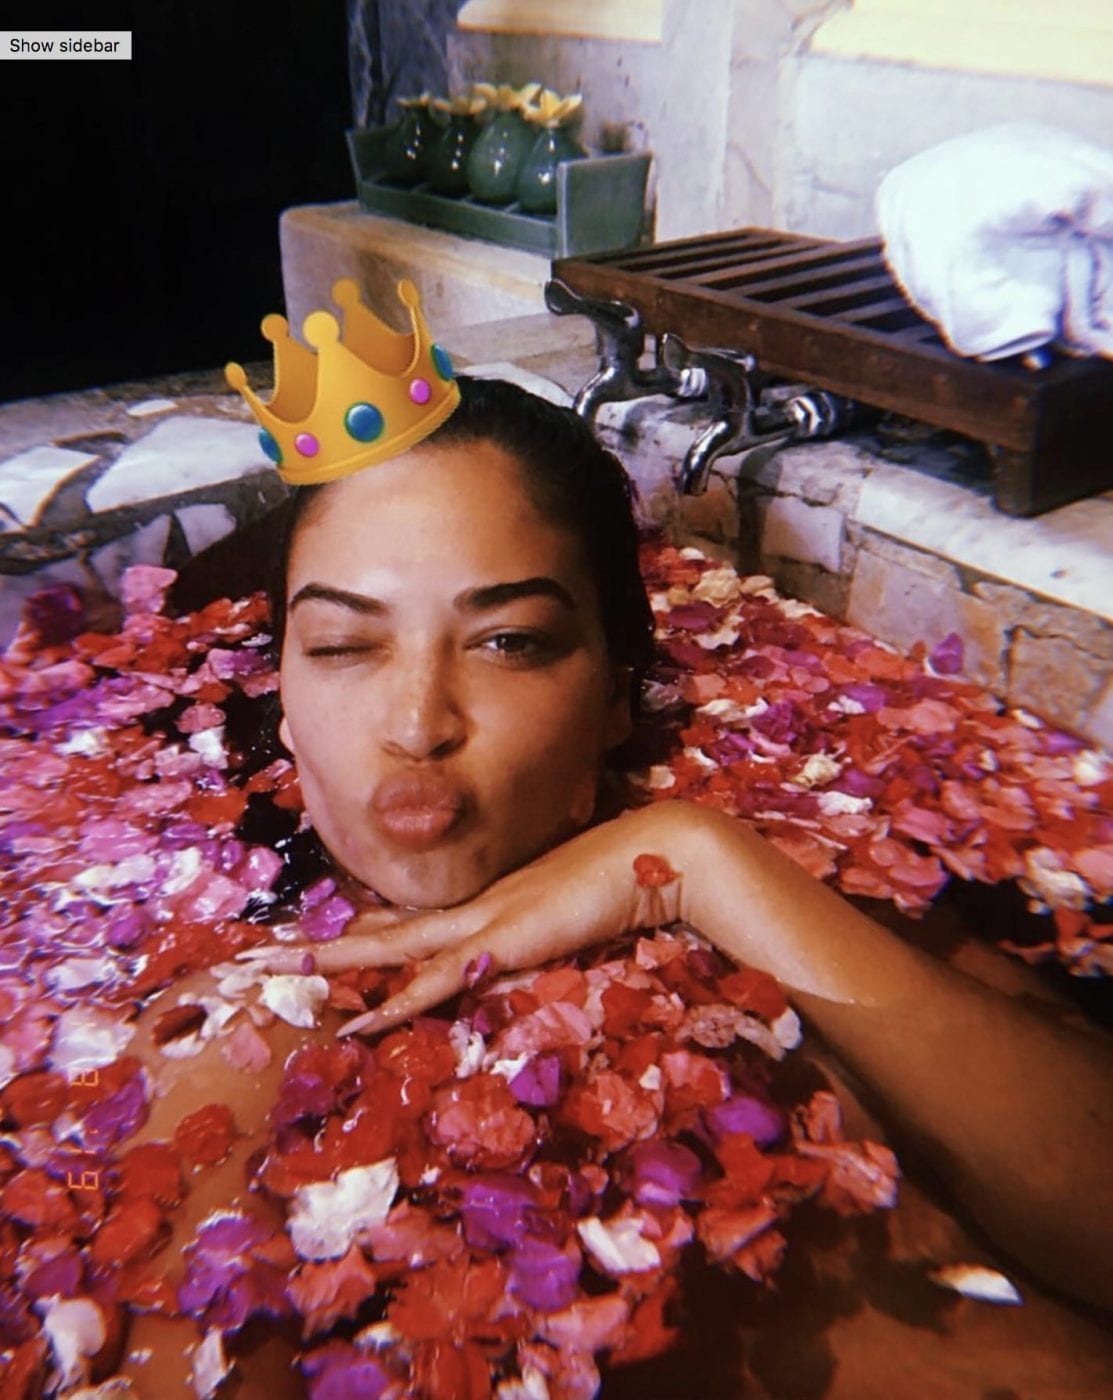 Shanina Shaik was pictured pouting among the petals. Credit: Instagram